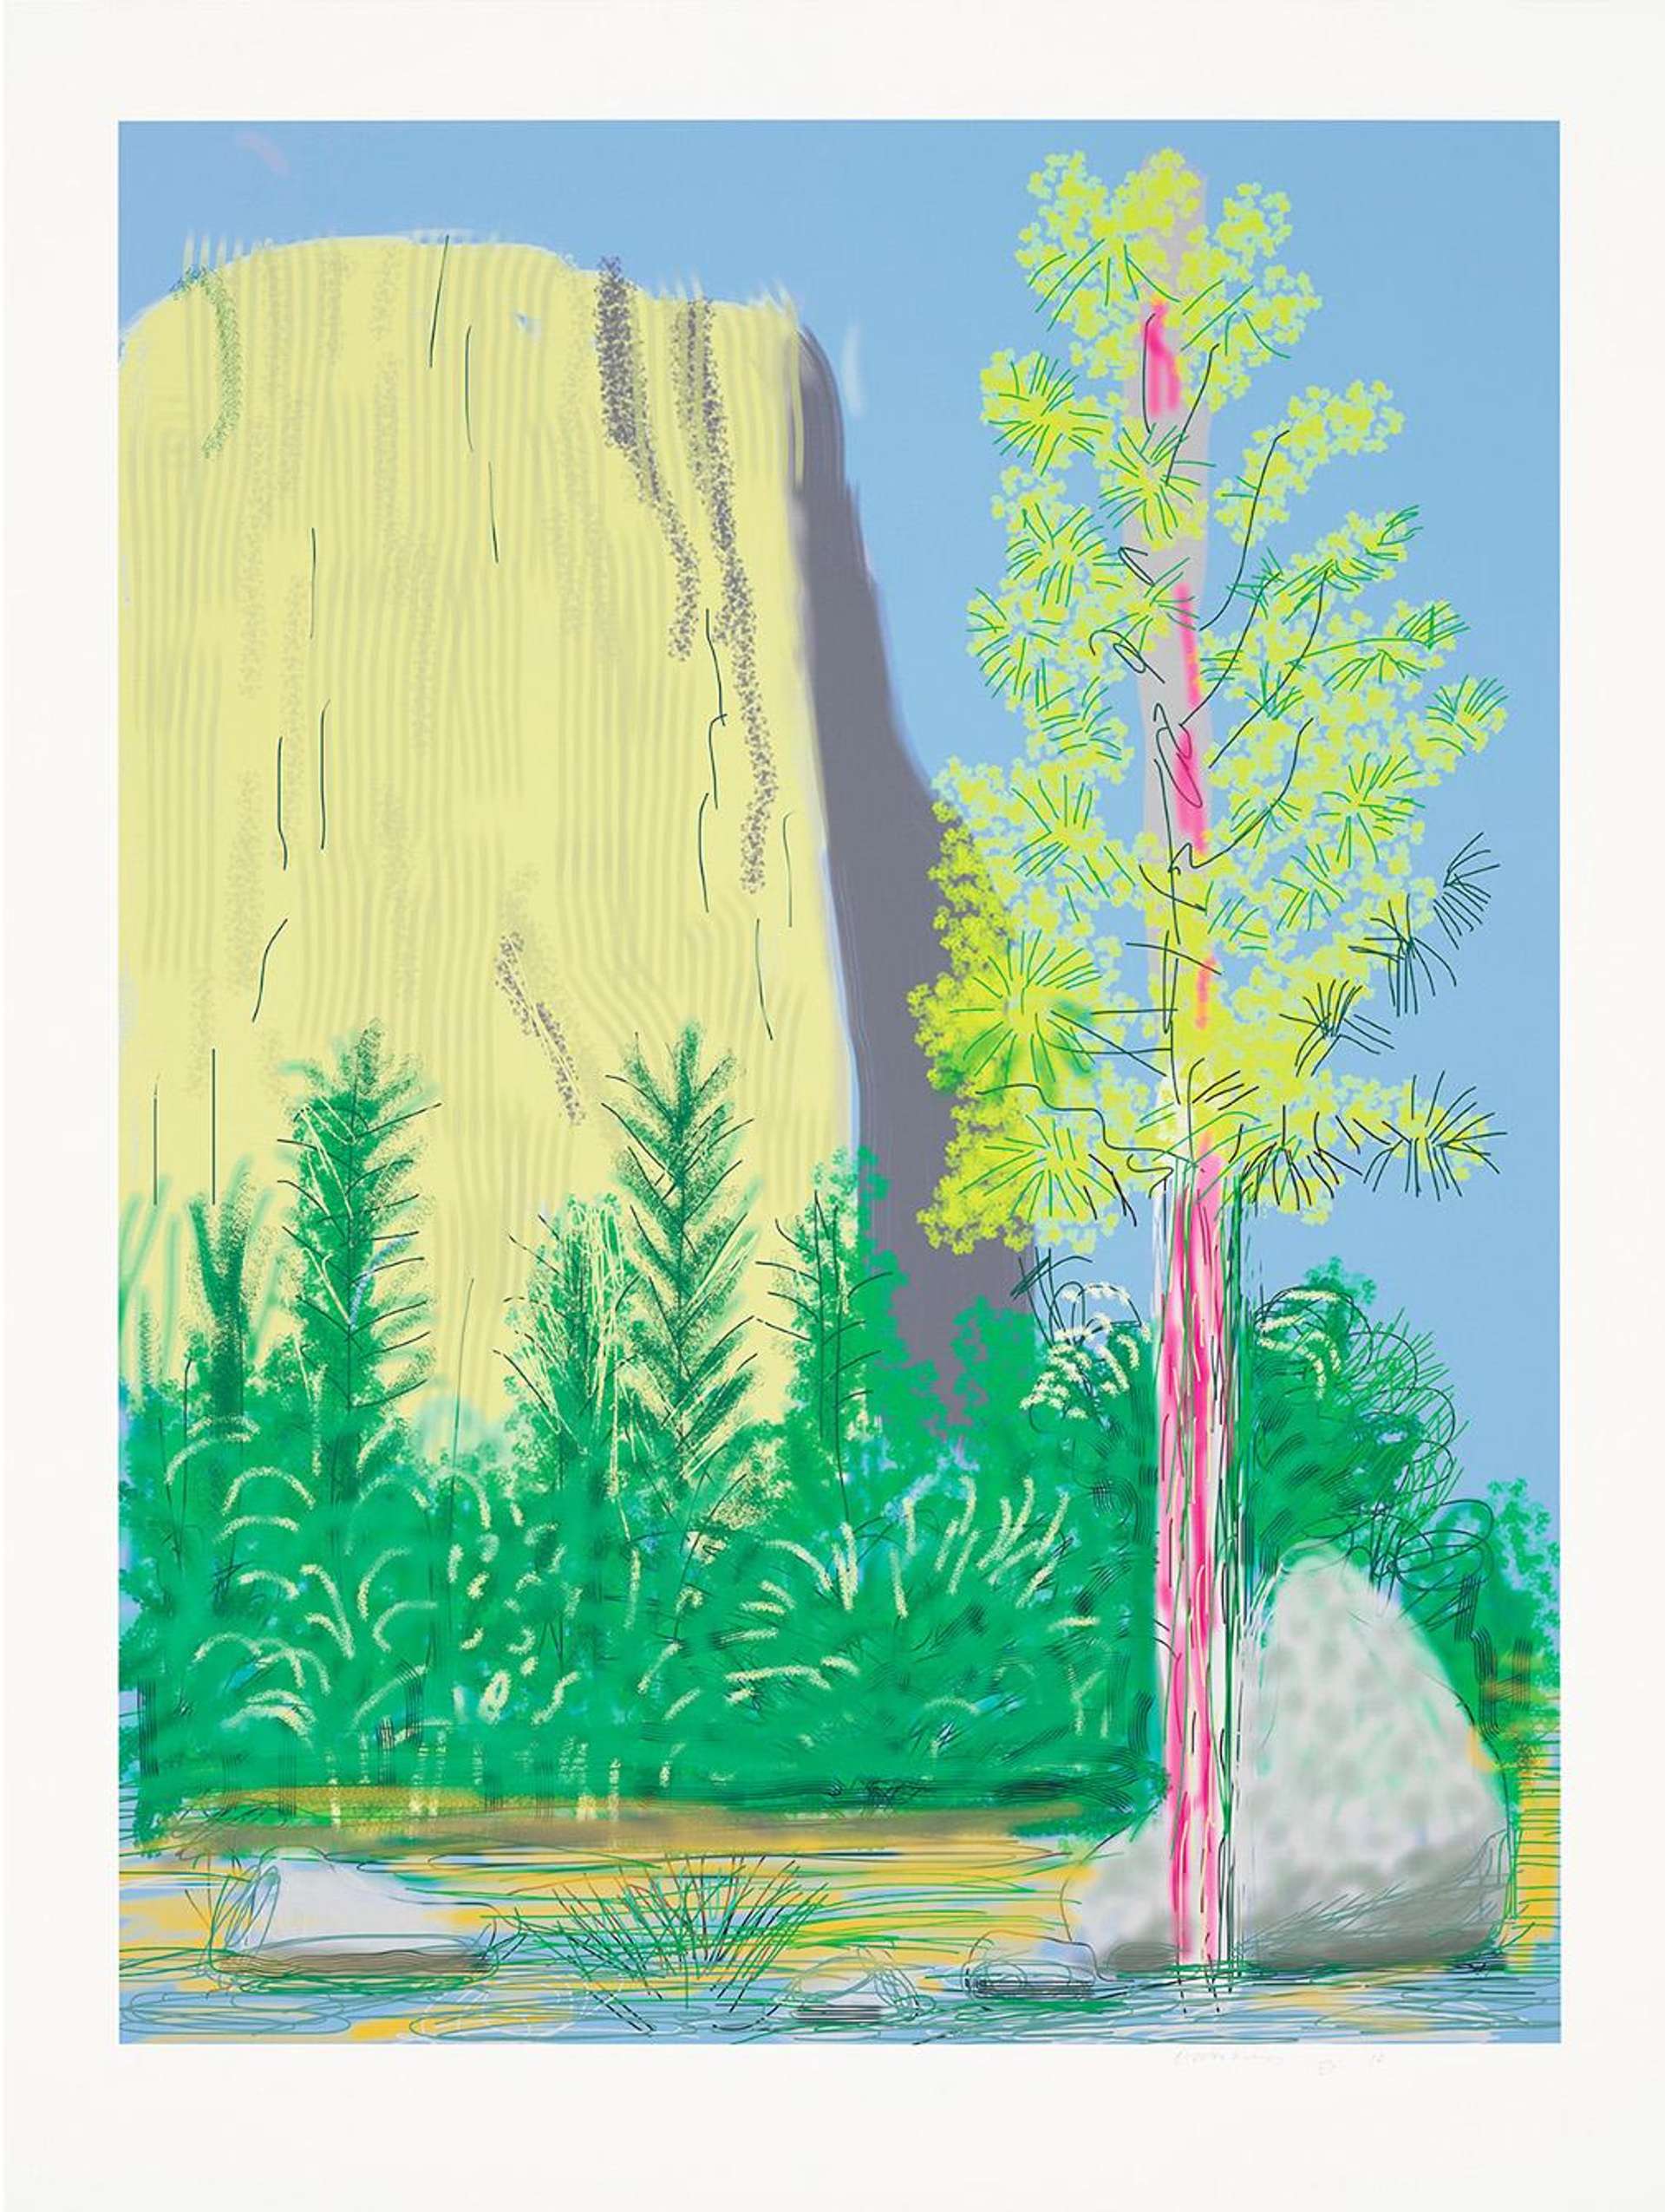 David Hockney’s The Yosemite Suite 22. A digital print of a landscape view of California's Yosemite National Park. A tall pine tree with a pink trunk and bright green leaves in front of a yellow coloured mountain and green shrubs.